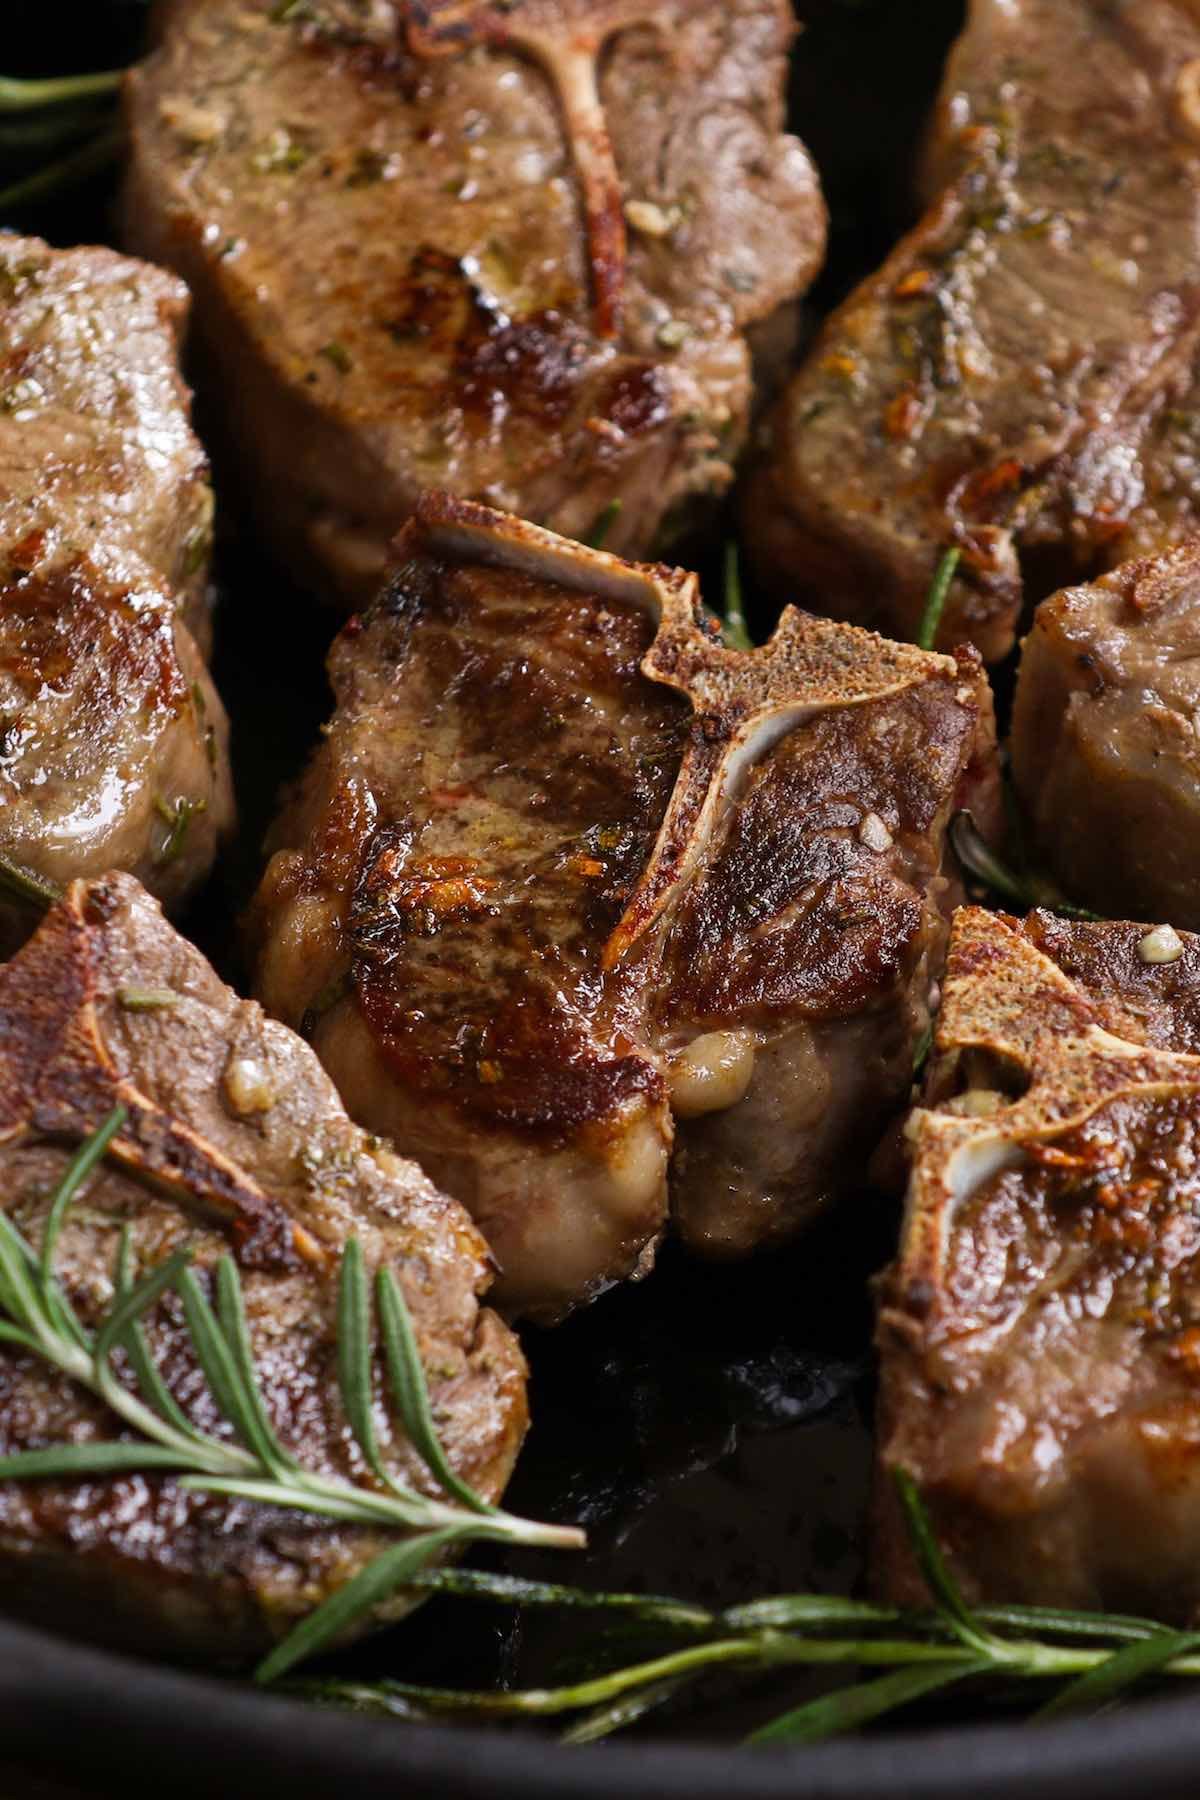 Tender Sous Vide Lamb Chops Recipe with Video - IzzyCooking